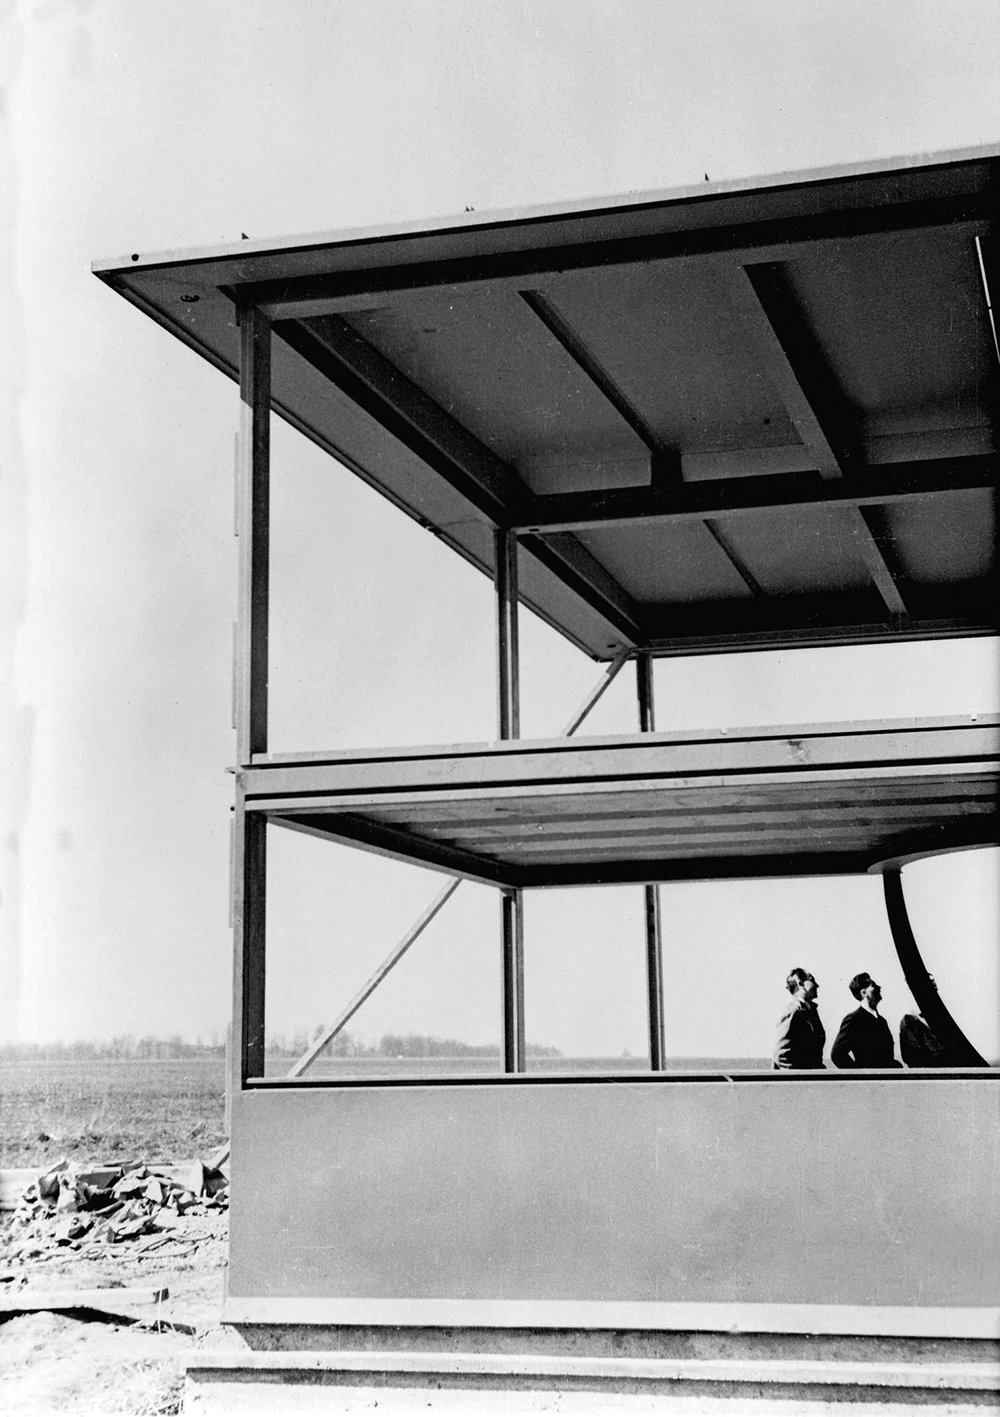 Roland Garros Flying Club (Jean Prouvé, with architects Eugène Beaudouin and Marcel Lods). View of the building site, Buc, 1935.